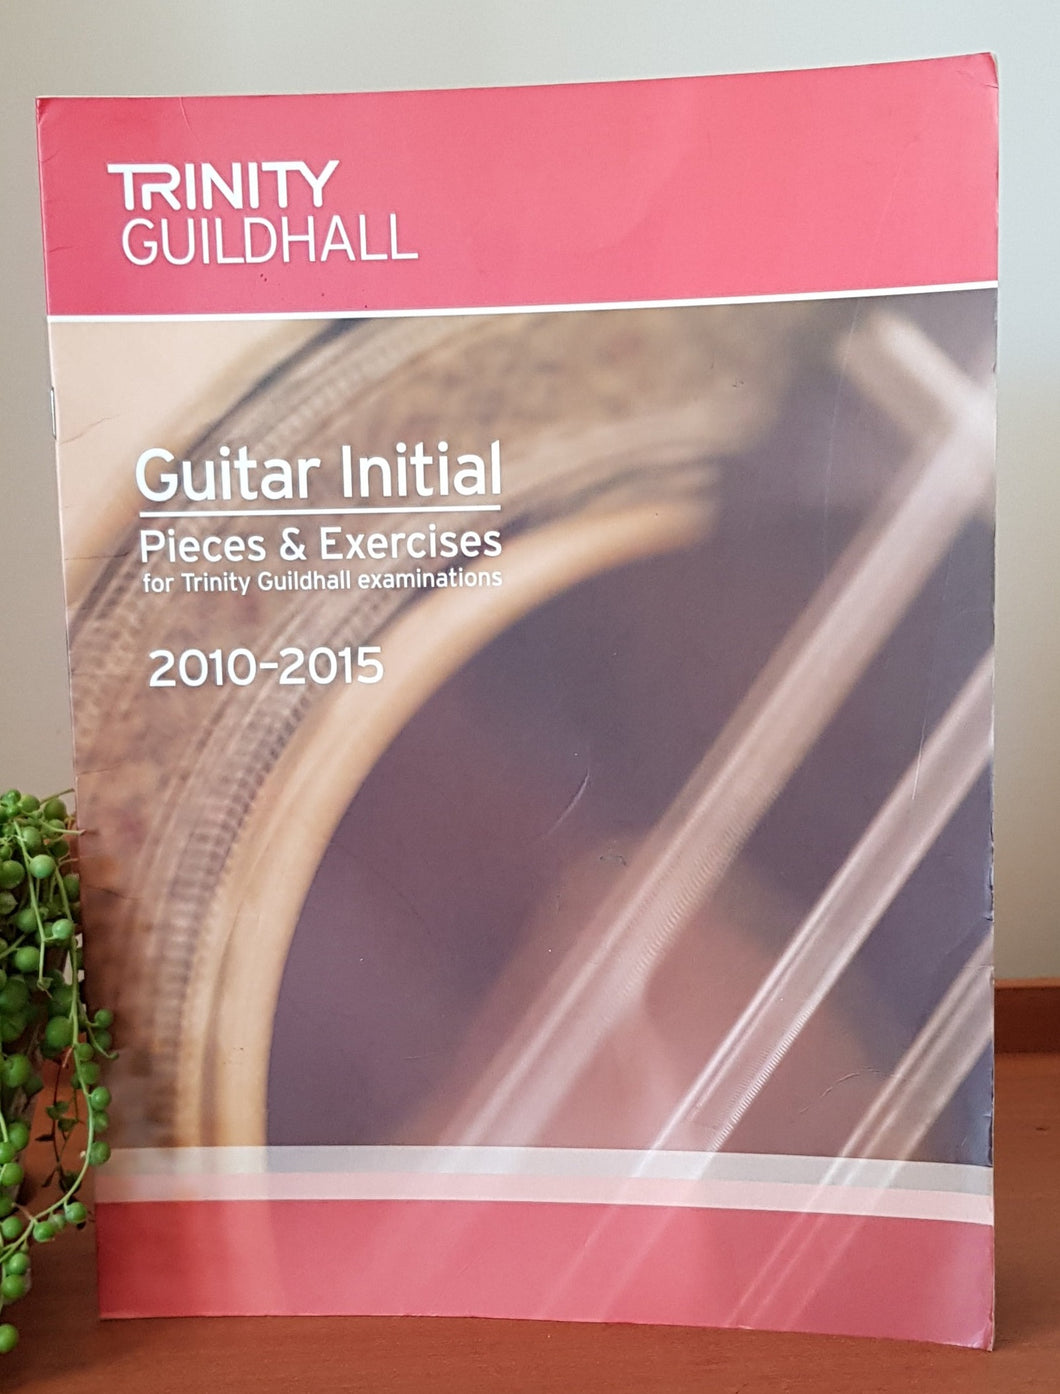 Guitar Initial Pieces & Exercises for Trinity Guildhall Examinations 2010-2015